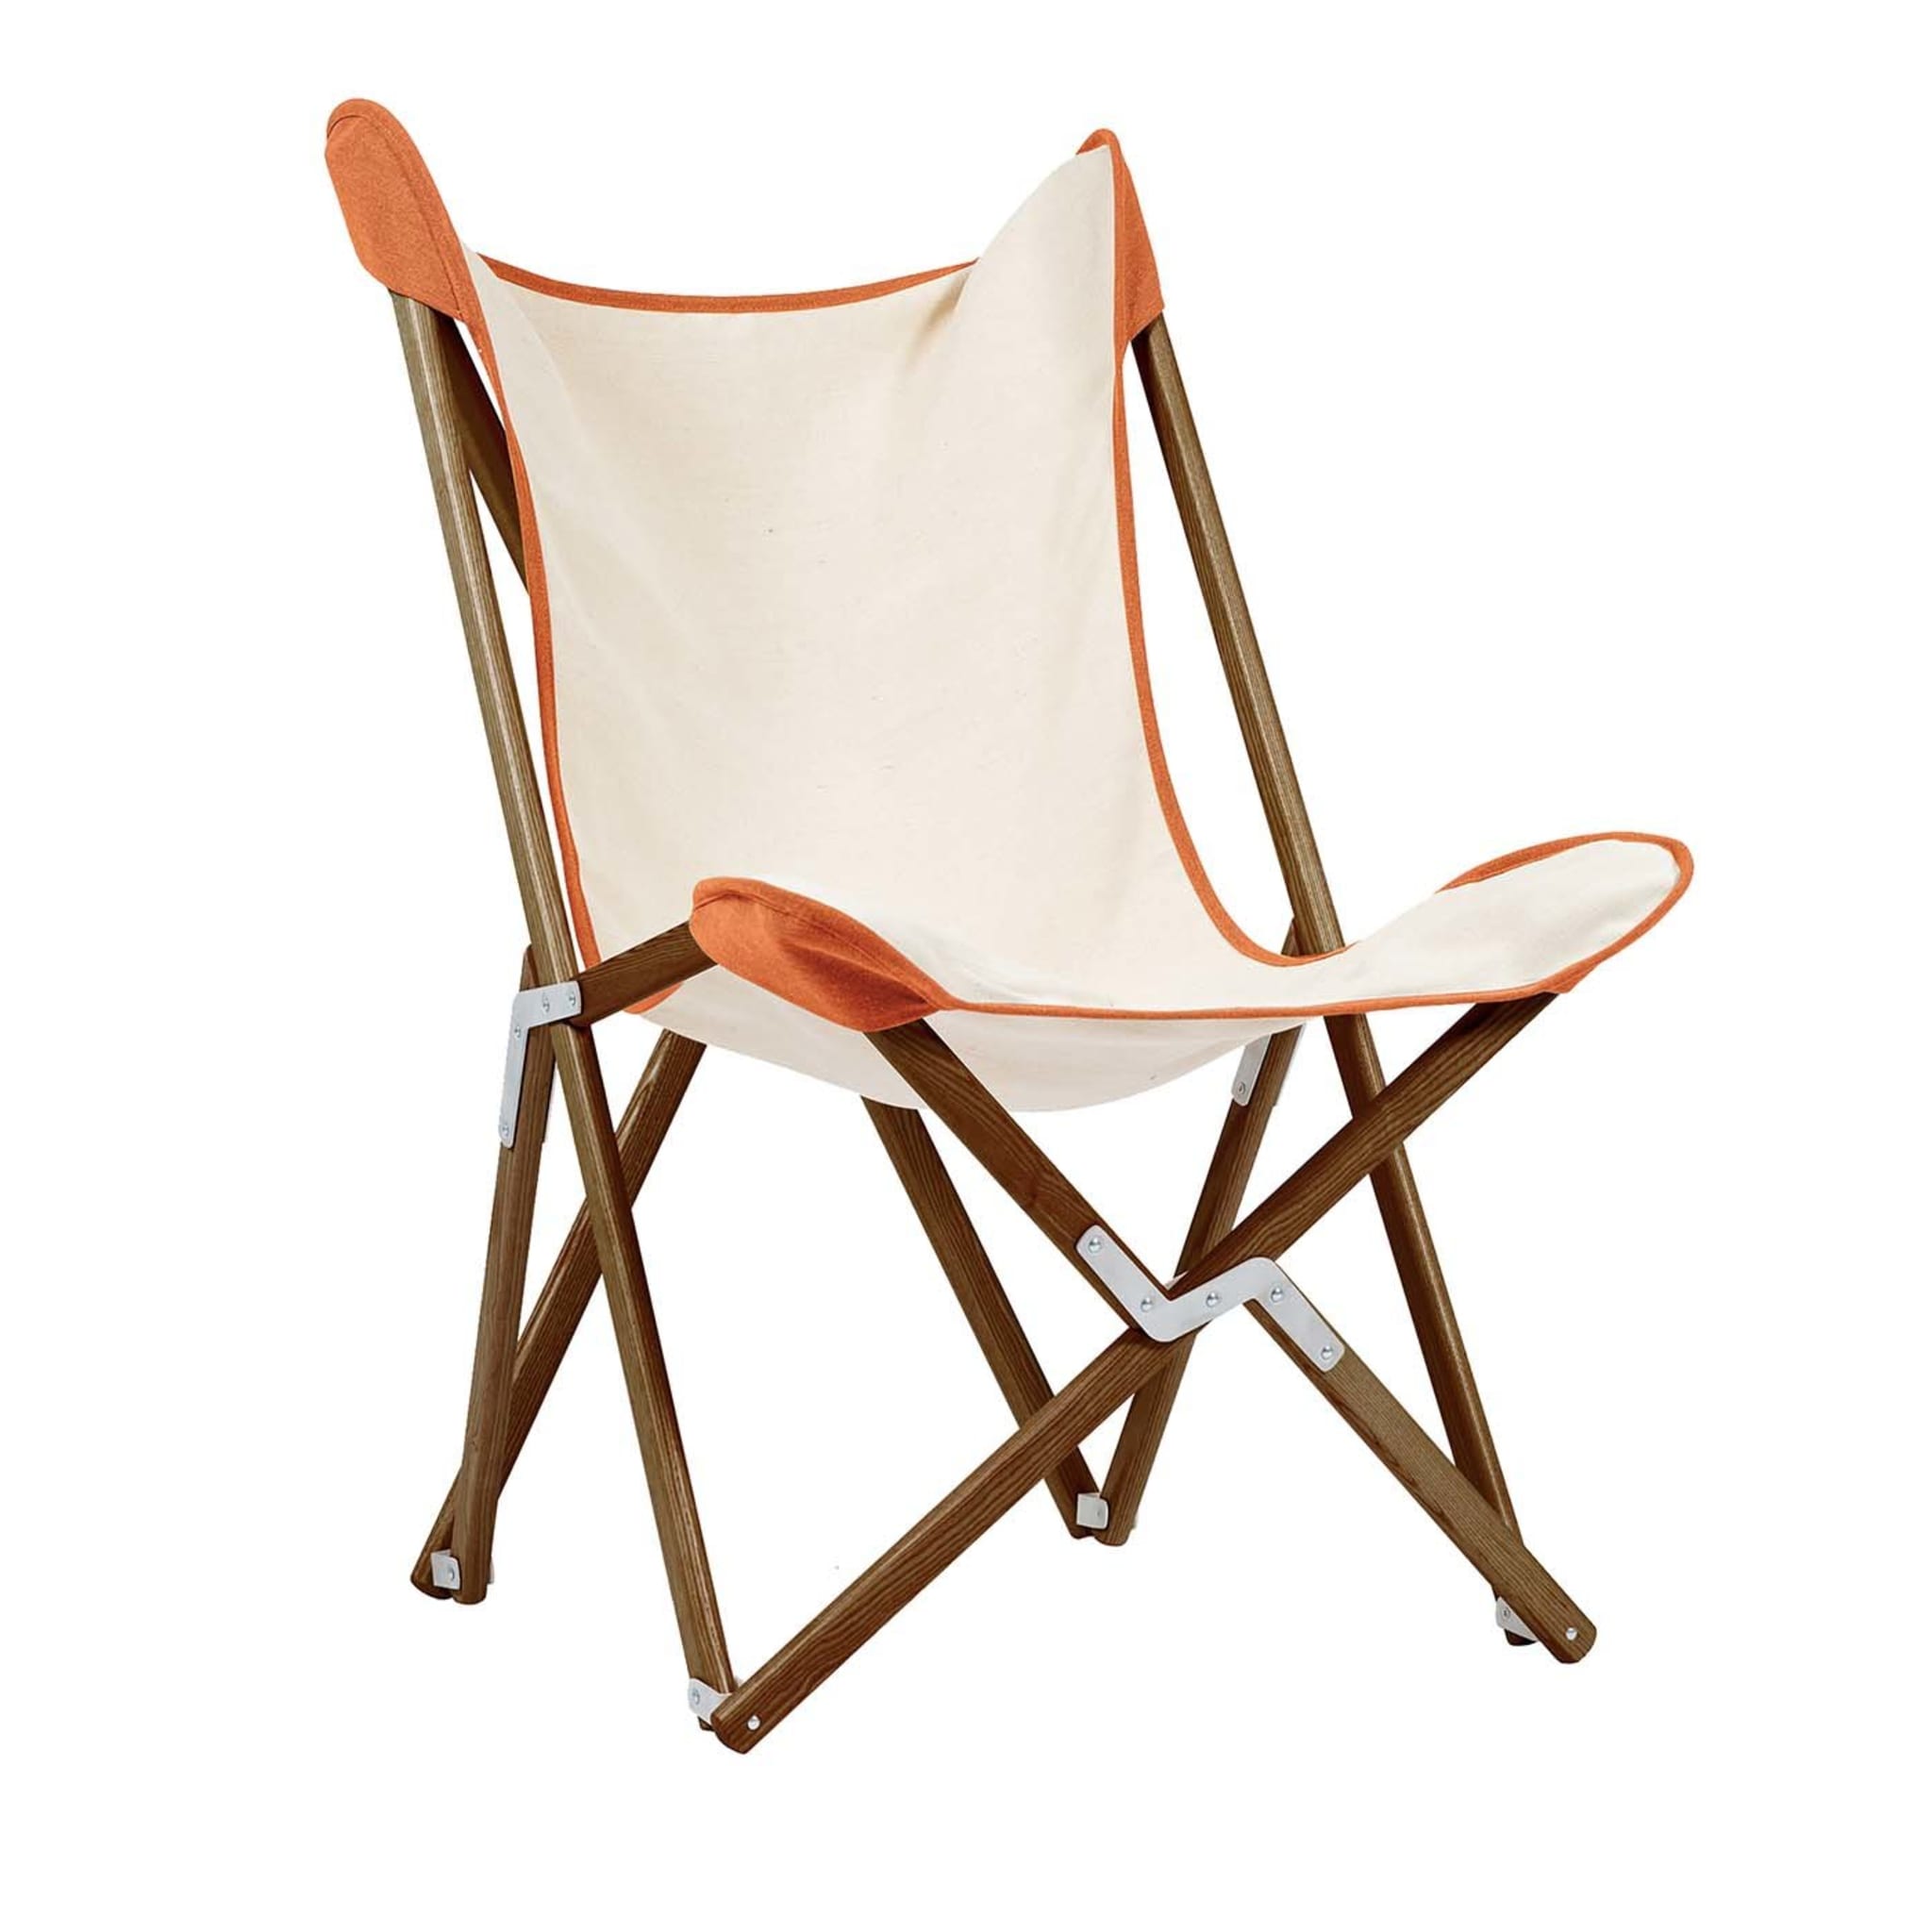 Tripolina Armchair in Cream and Terracotta Red - Main view